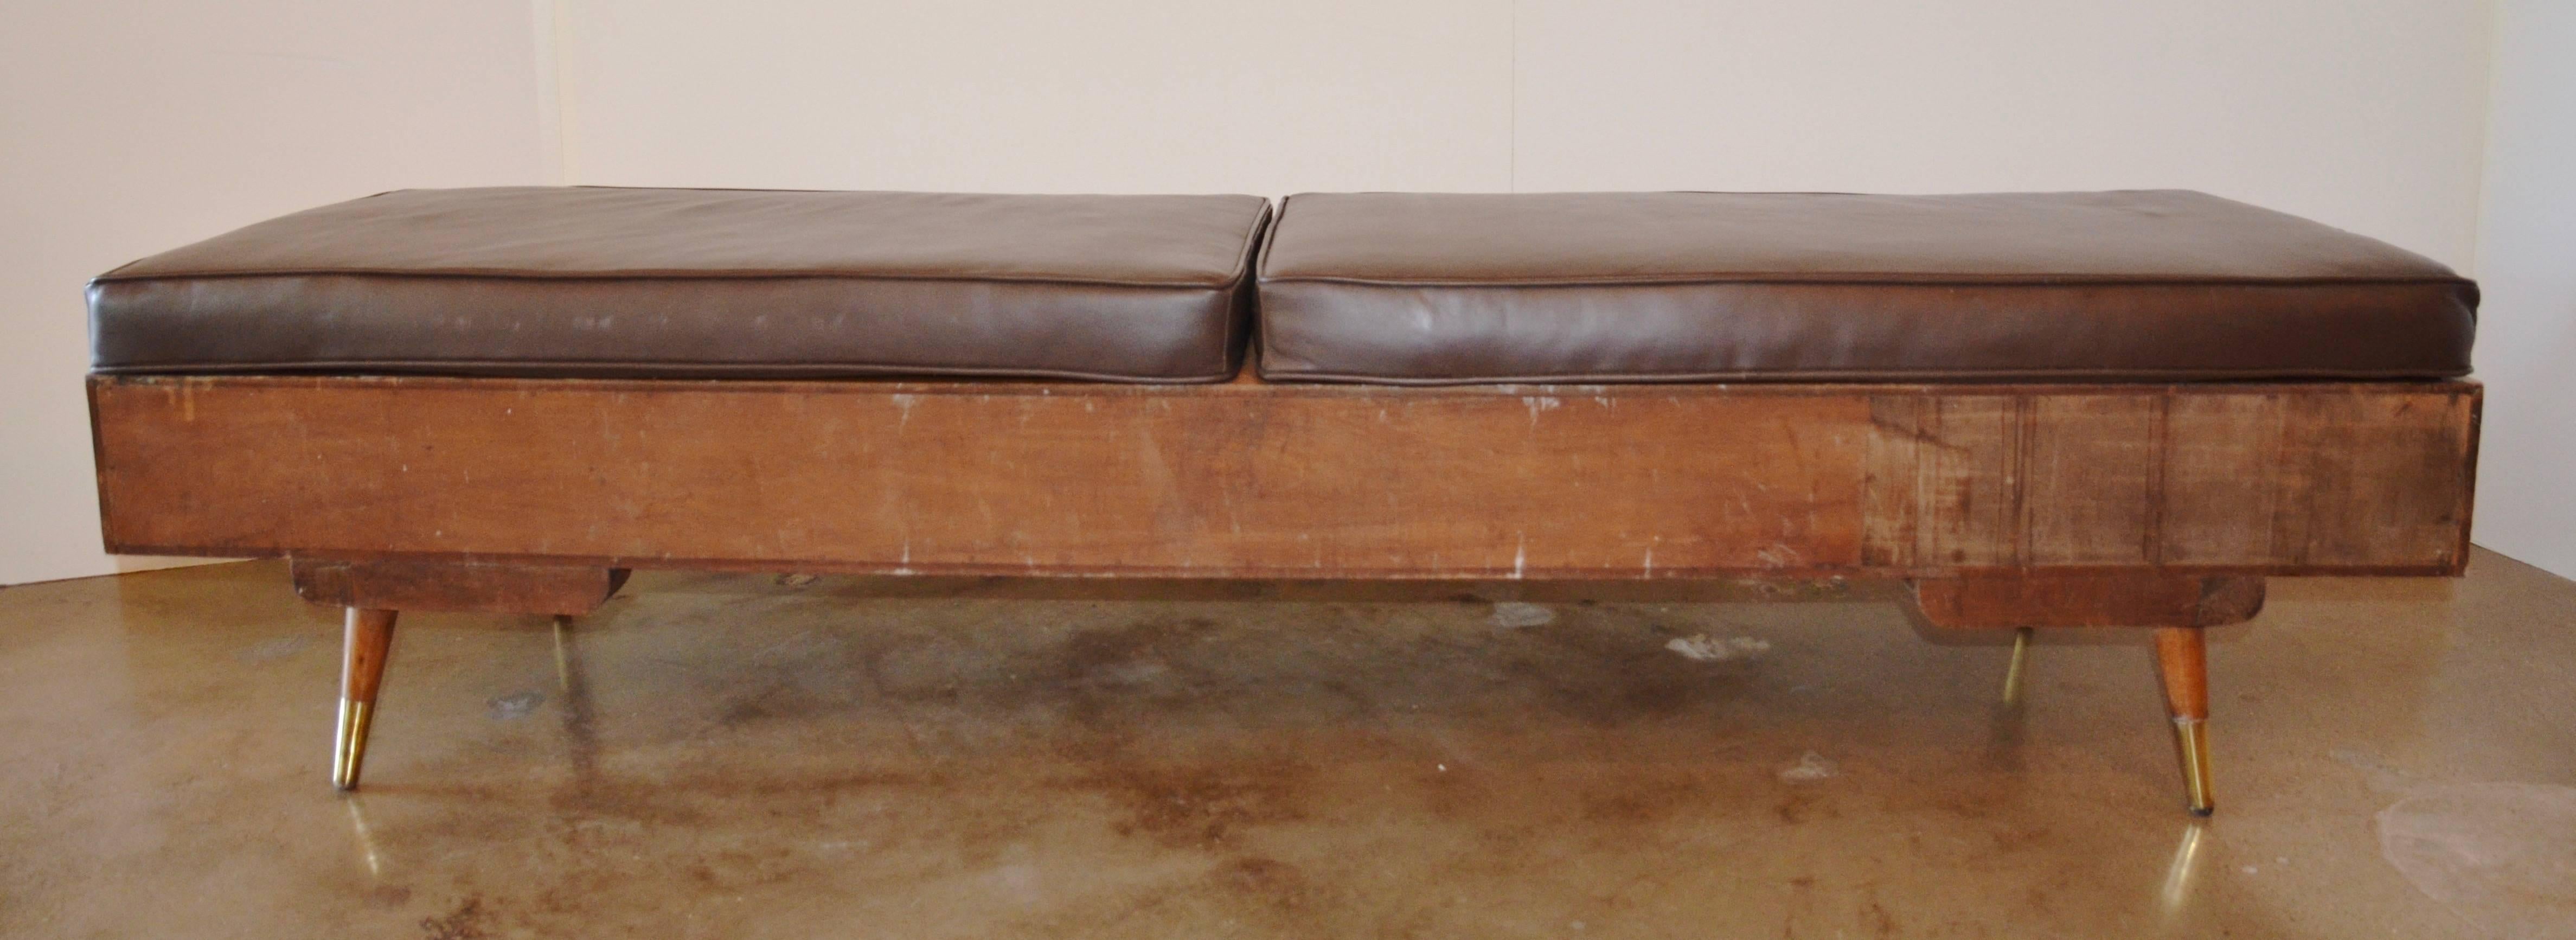 Mid-Century Bench with Drawers and Leather Cushions 1